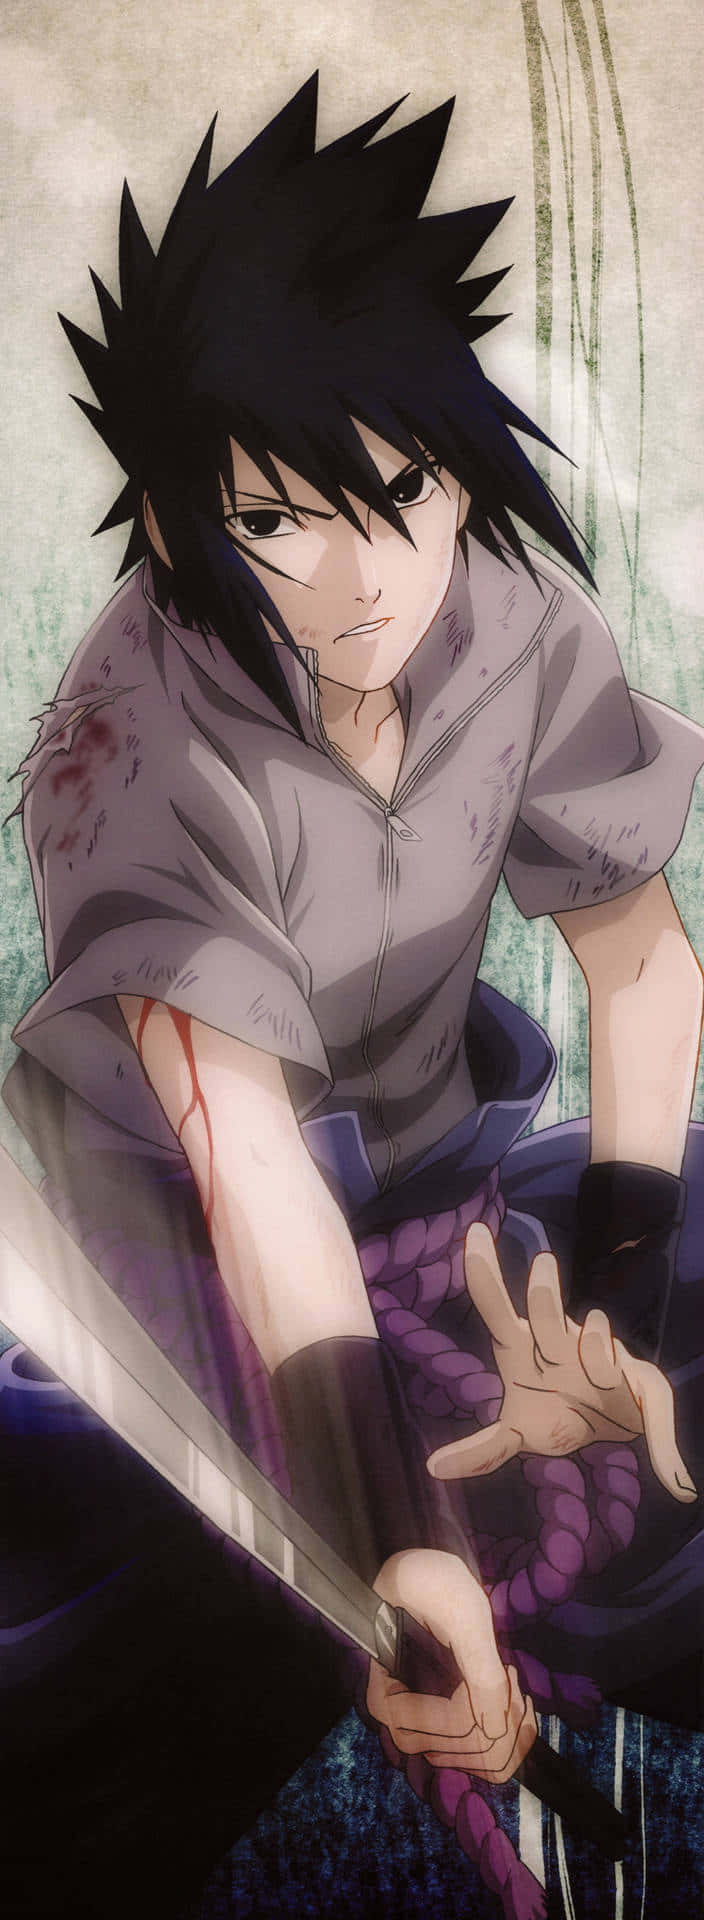 "Exhausting a long dream-filled journey, here stands the once young Sasuke Uchiha" Wallpaper